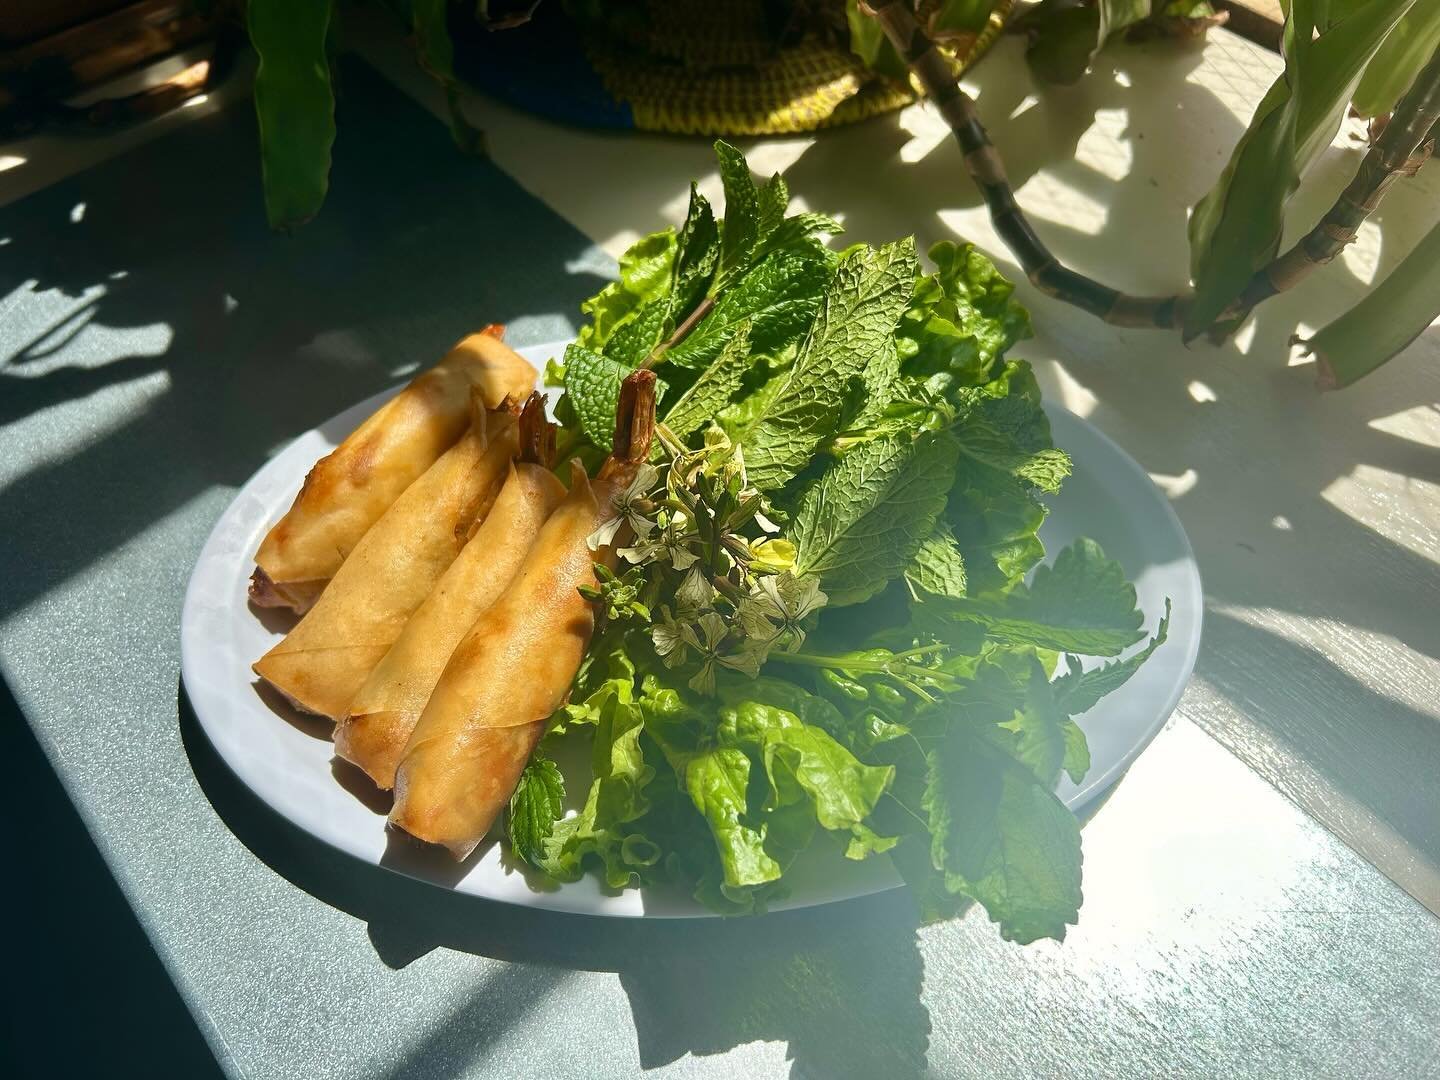 these are the kind of spring rolls that you hypothetically get two orders of, can&rsquo;t finish, tuck into a to-go box for later, leave sitting atop your car while you drive all over bushwick and back, watch fly off the roof and straight onto Myrtle